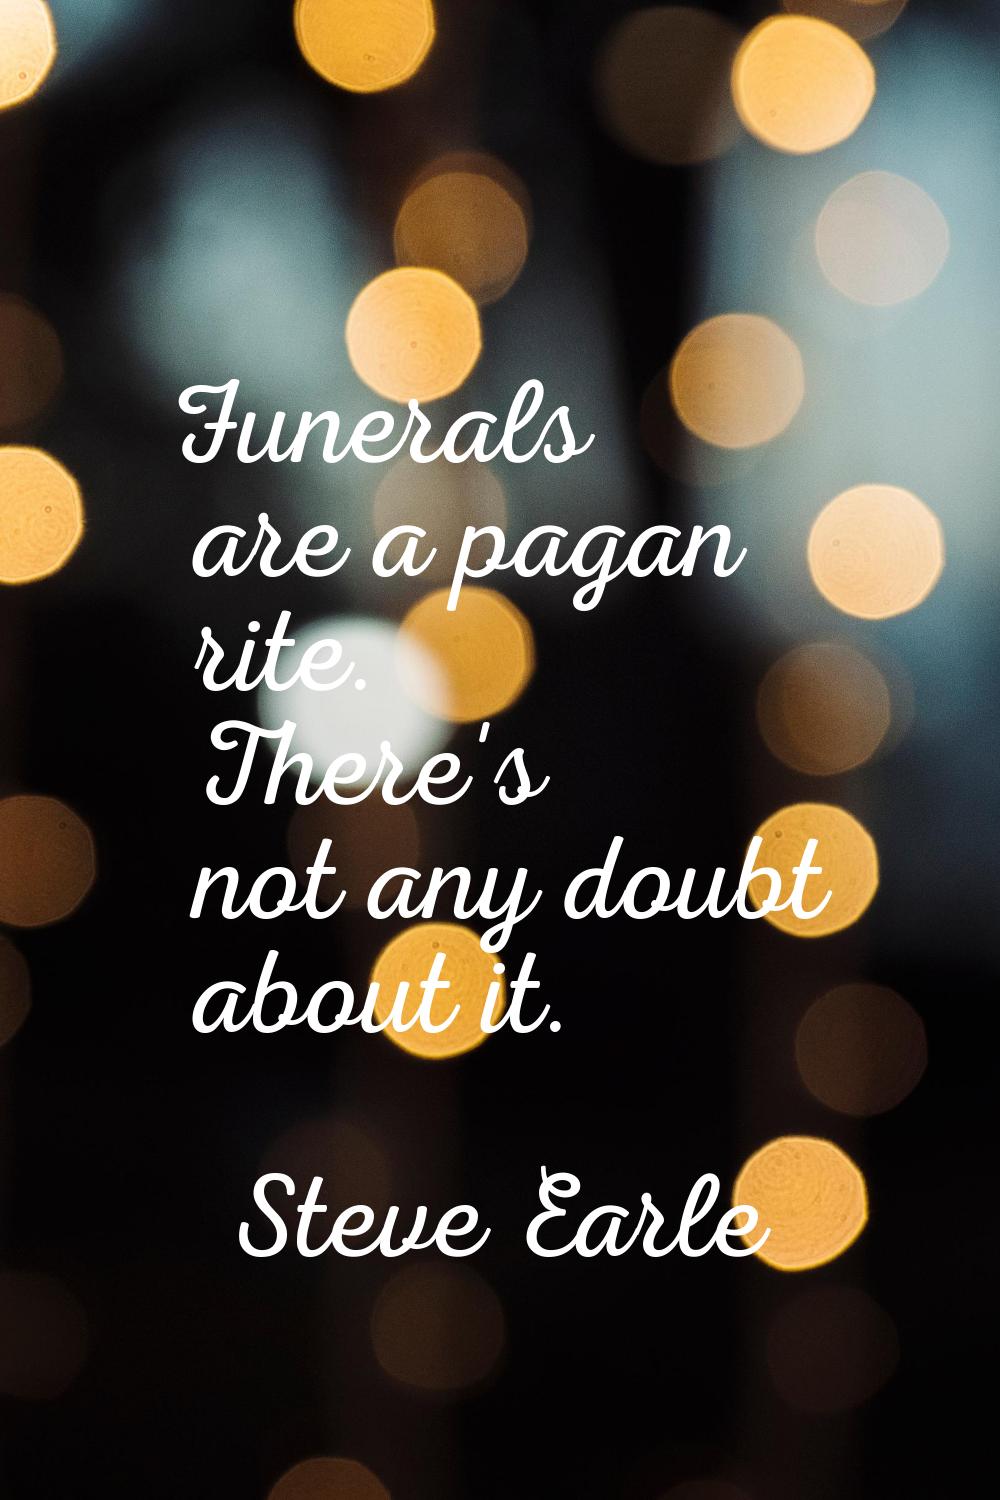 Funerals are a pagan rite. There's not any doubt about it.